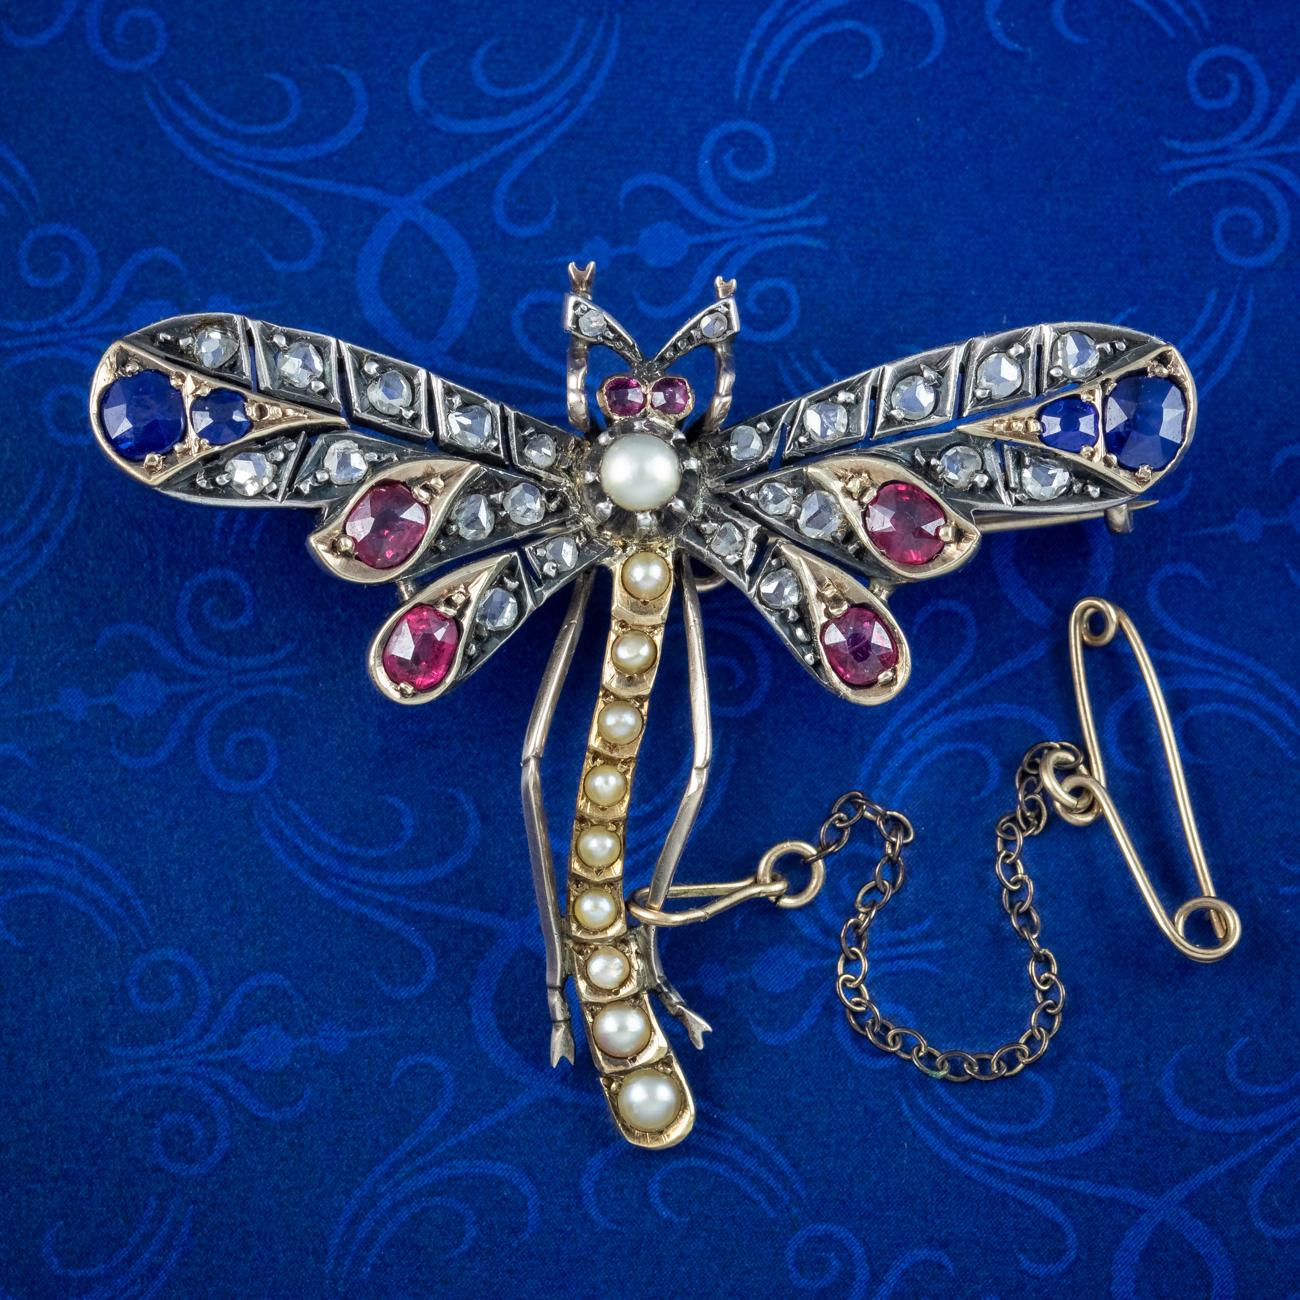 A colourful antique Victorian dragonfly brooch decorated with an array of coloured gemstones across the front, including blue sapphires, pink rubies and twinkling rose cut diamonds with a row of natural pearls running down the length of the body and